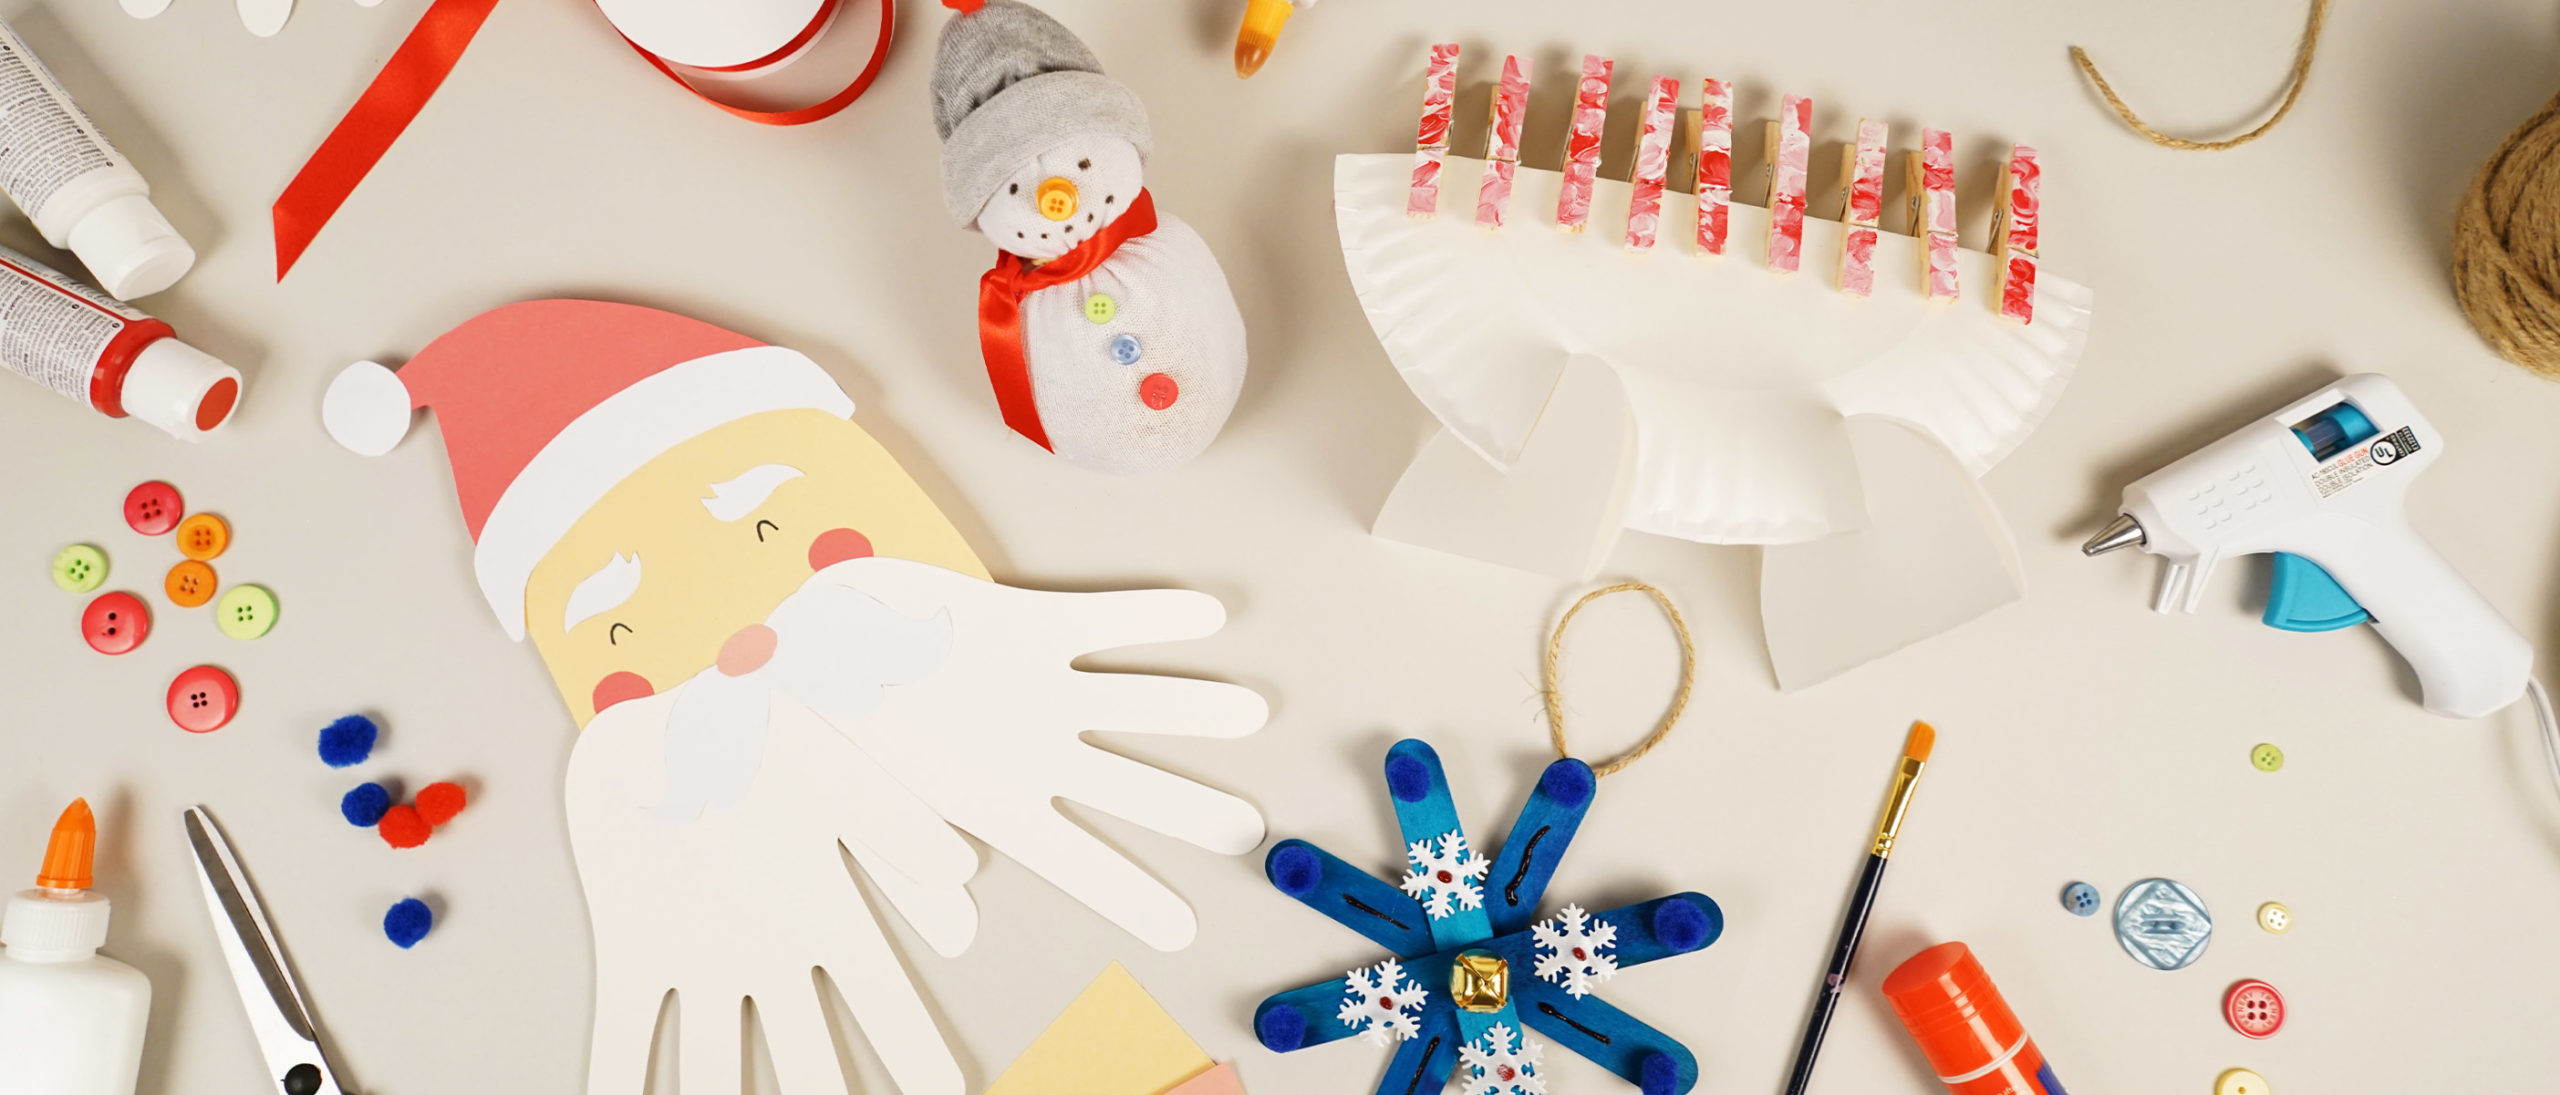 Easy and Affordable Holiday Crafts for Kids